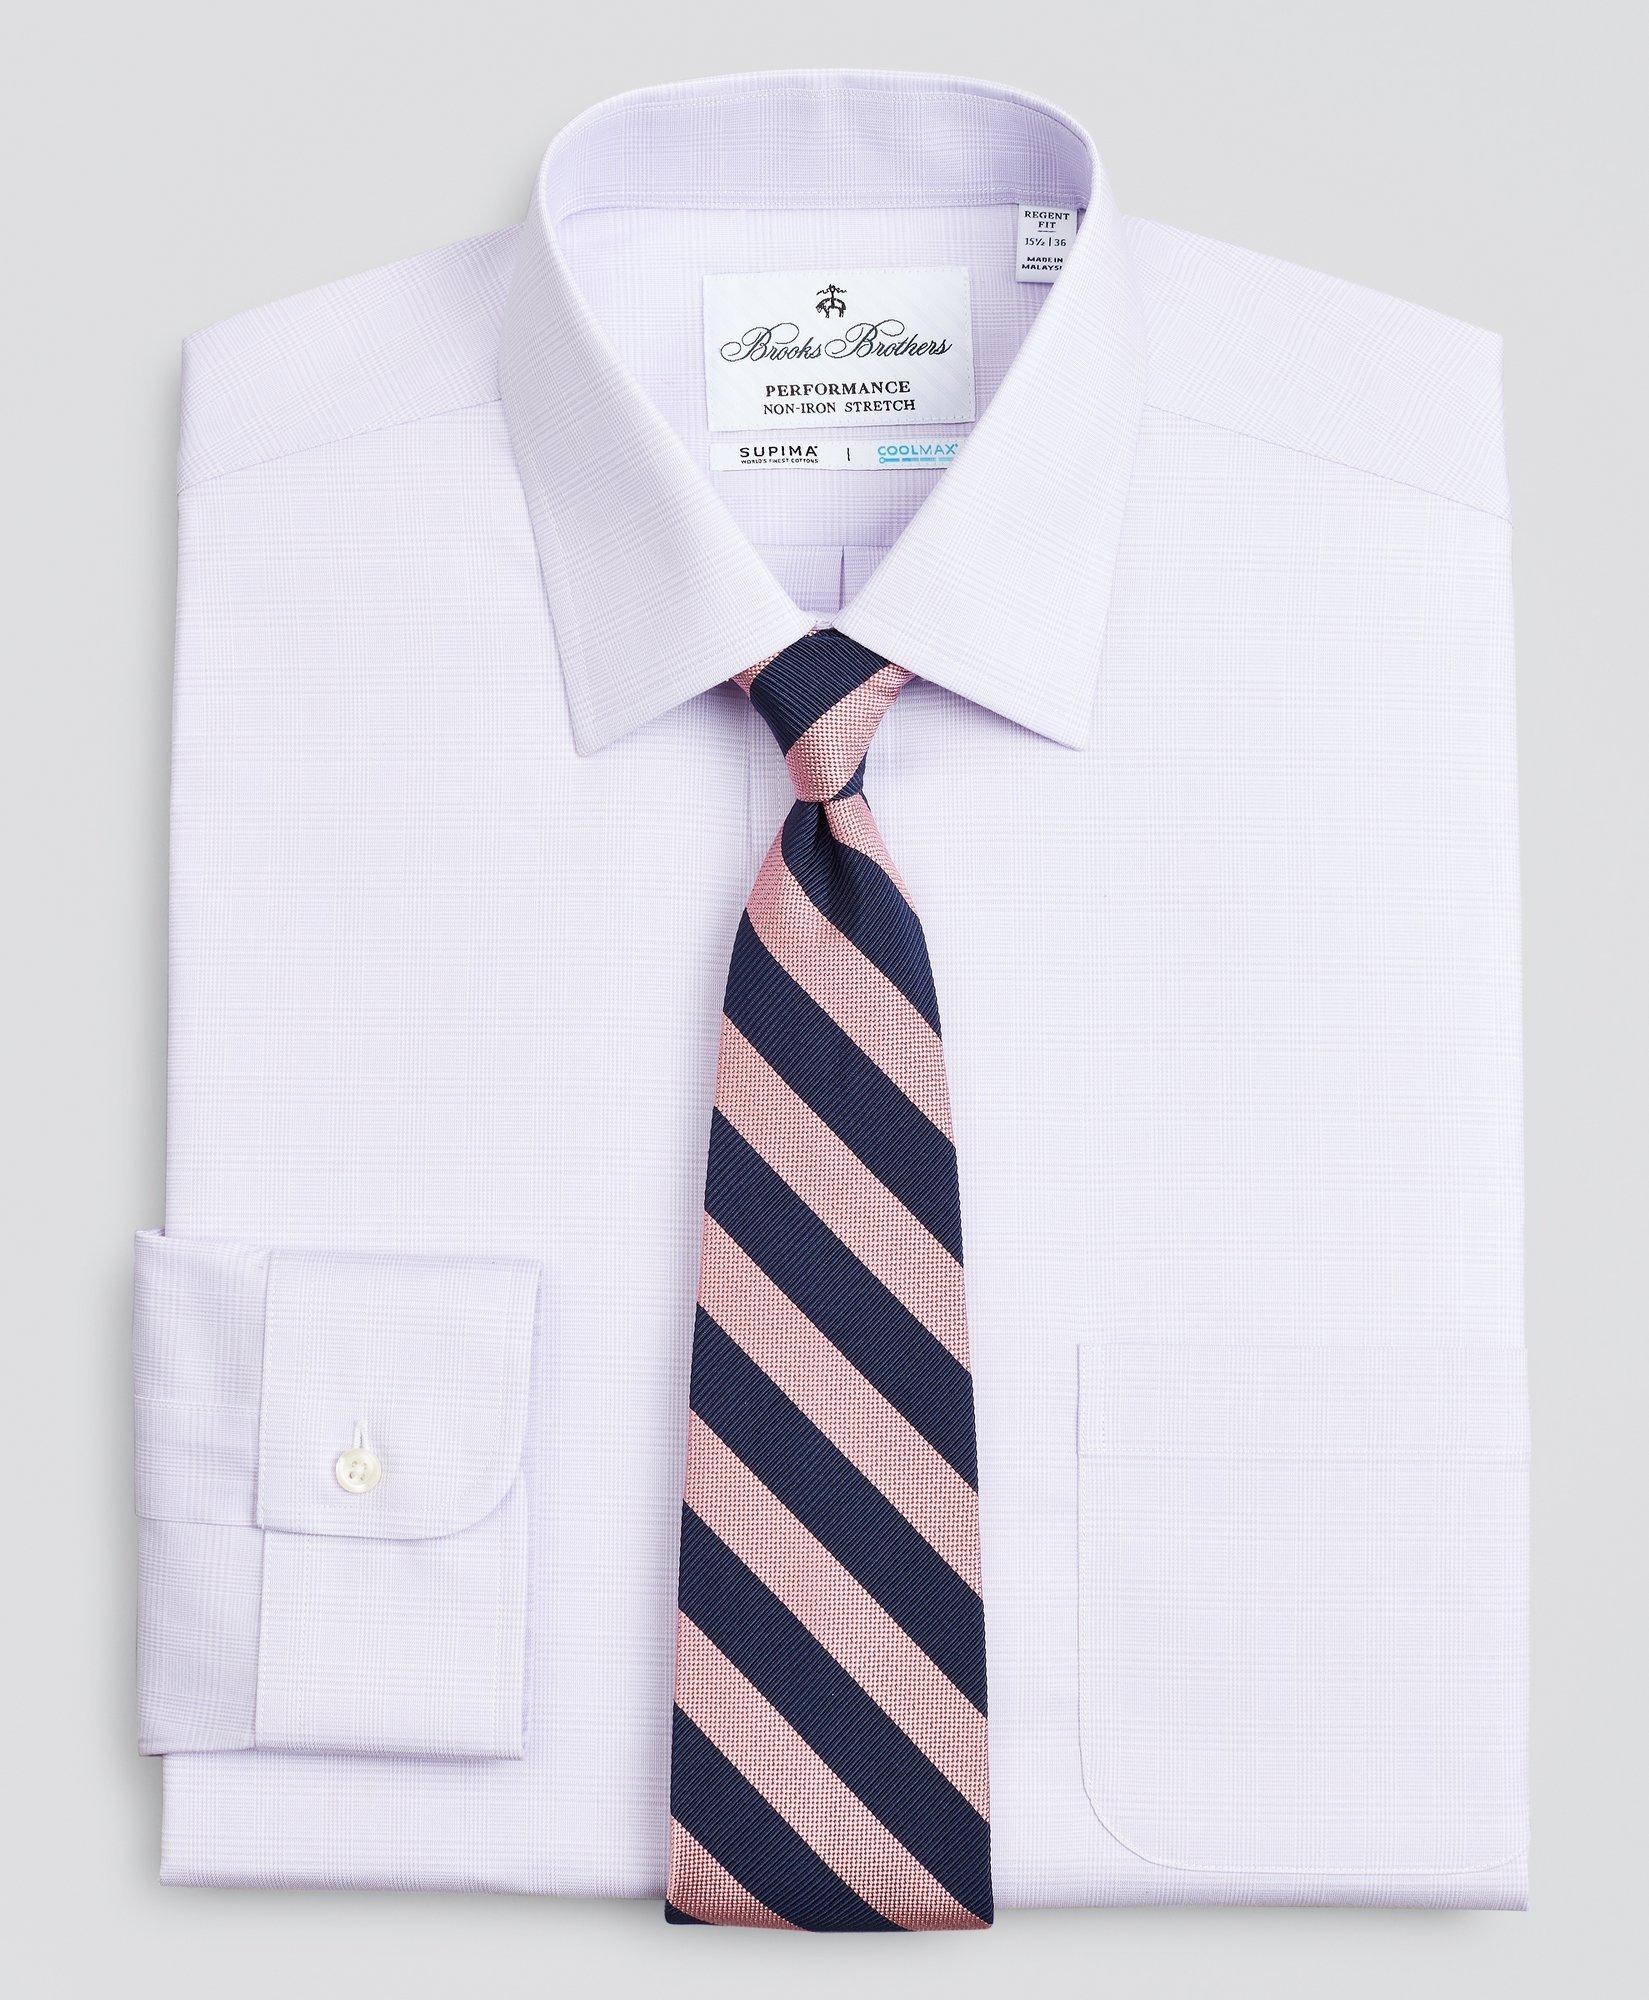 Regent Regular-Fit Dress Shirt, Performance Non-Iron with COOLMAX®, Ainsley  Collar Twill Check